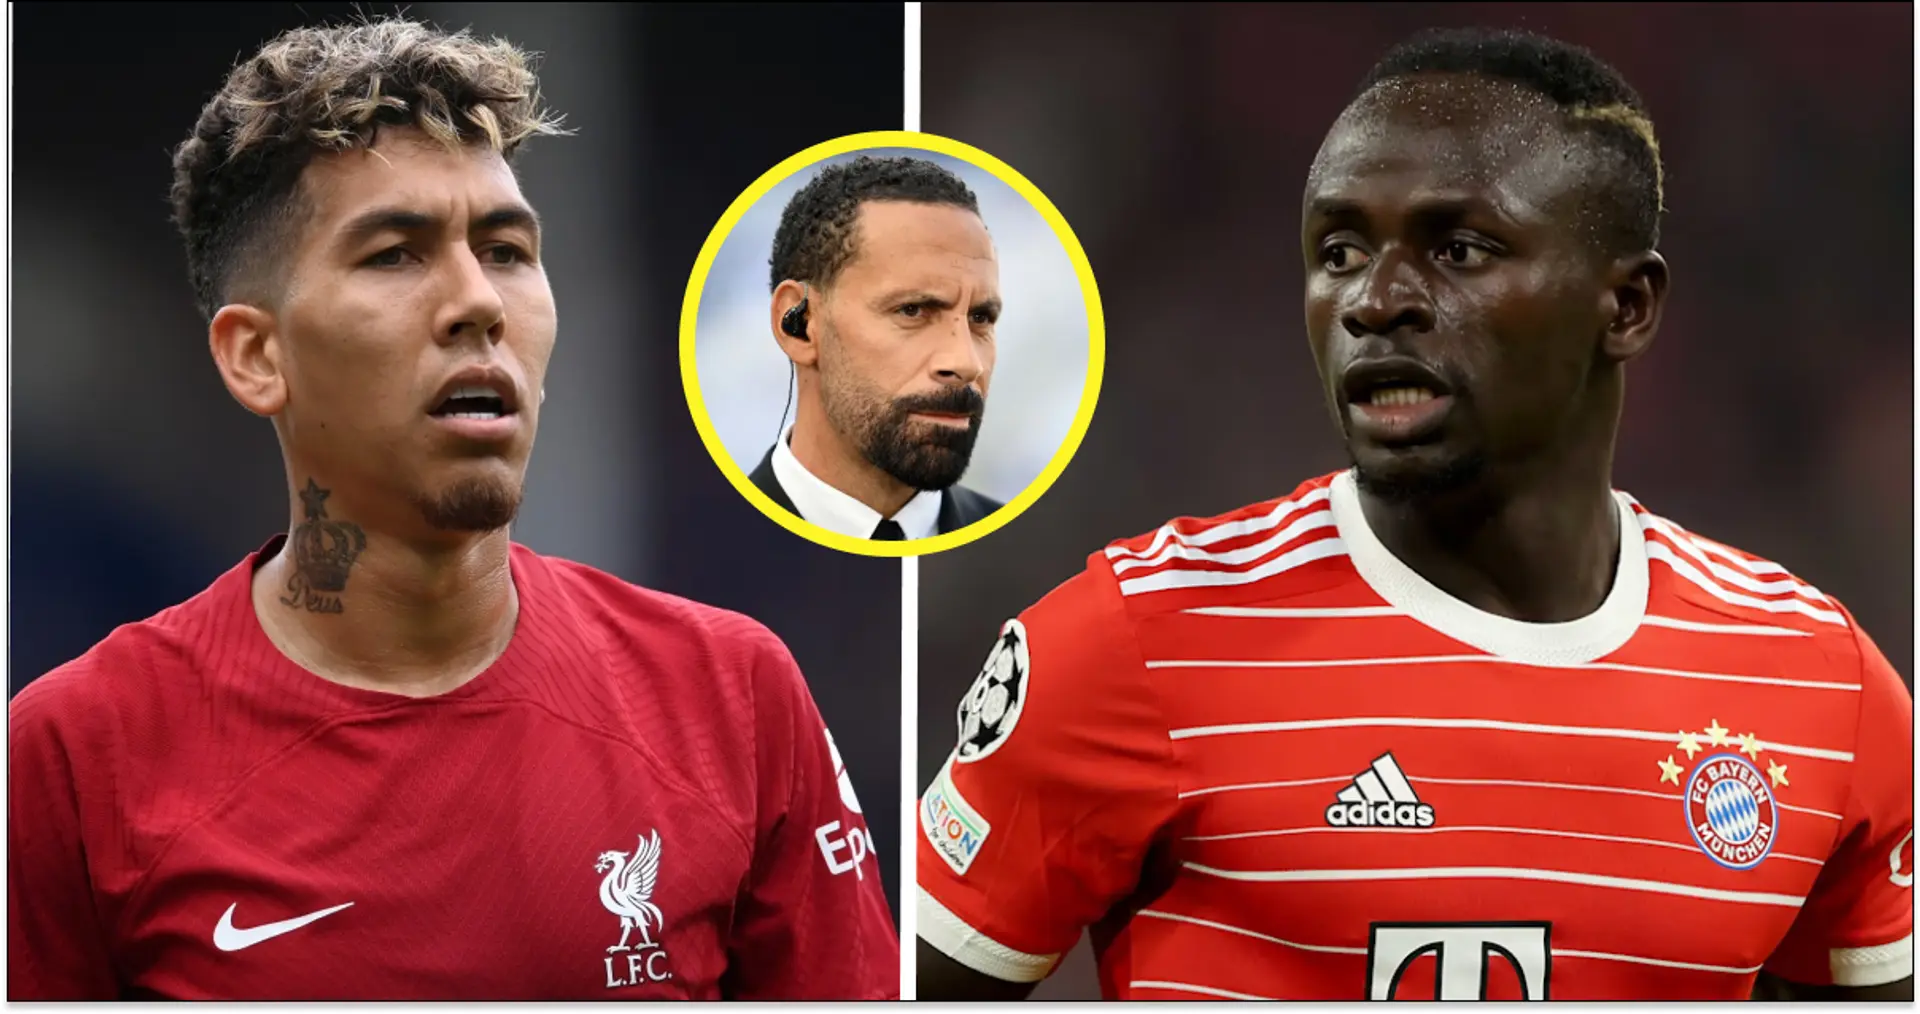 'They should have let Firmino go': Ferdinand questions Liverpool selling Mane